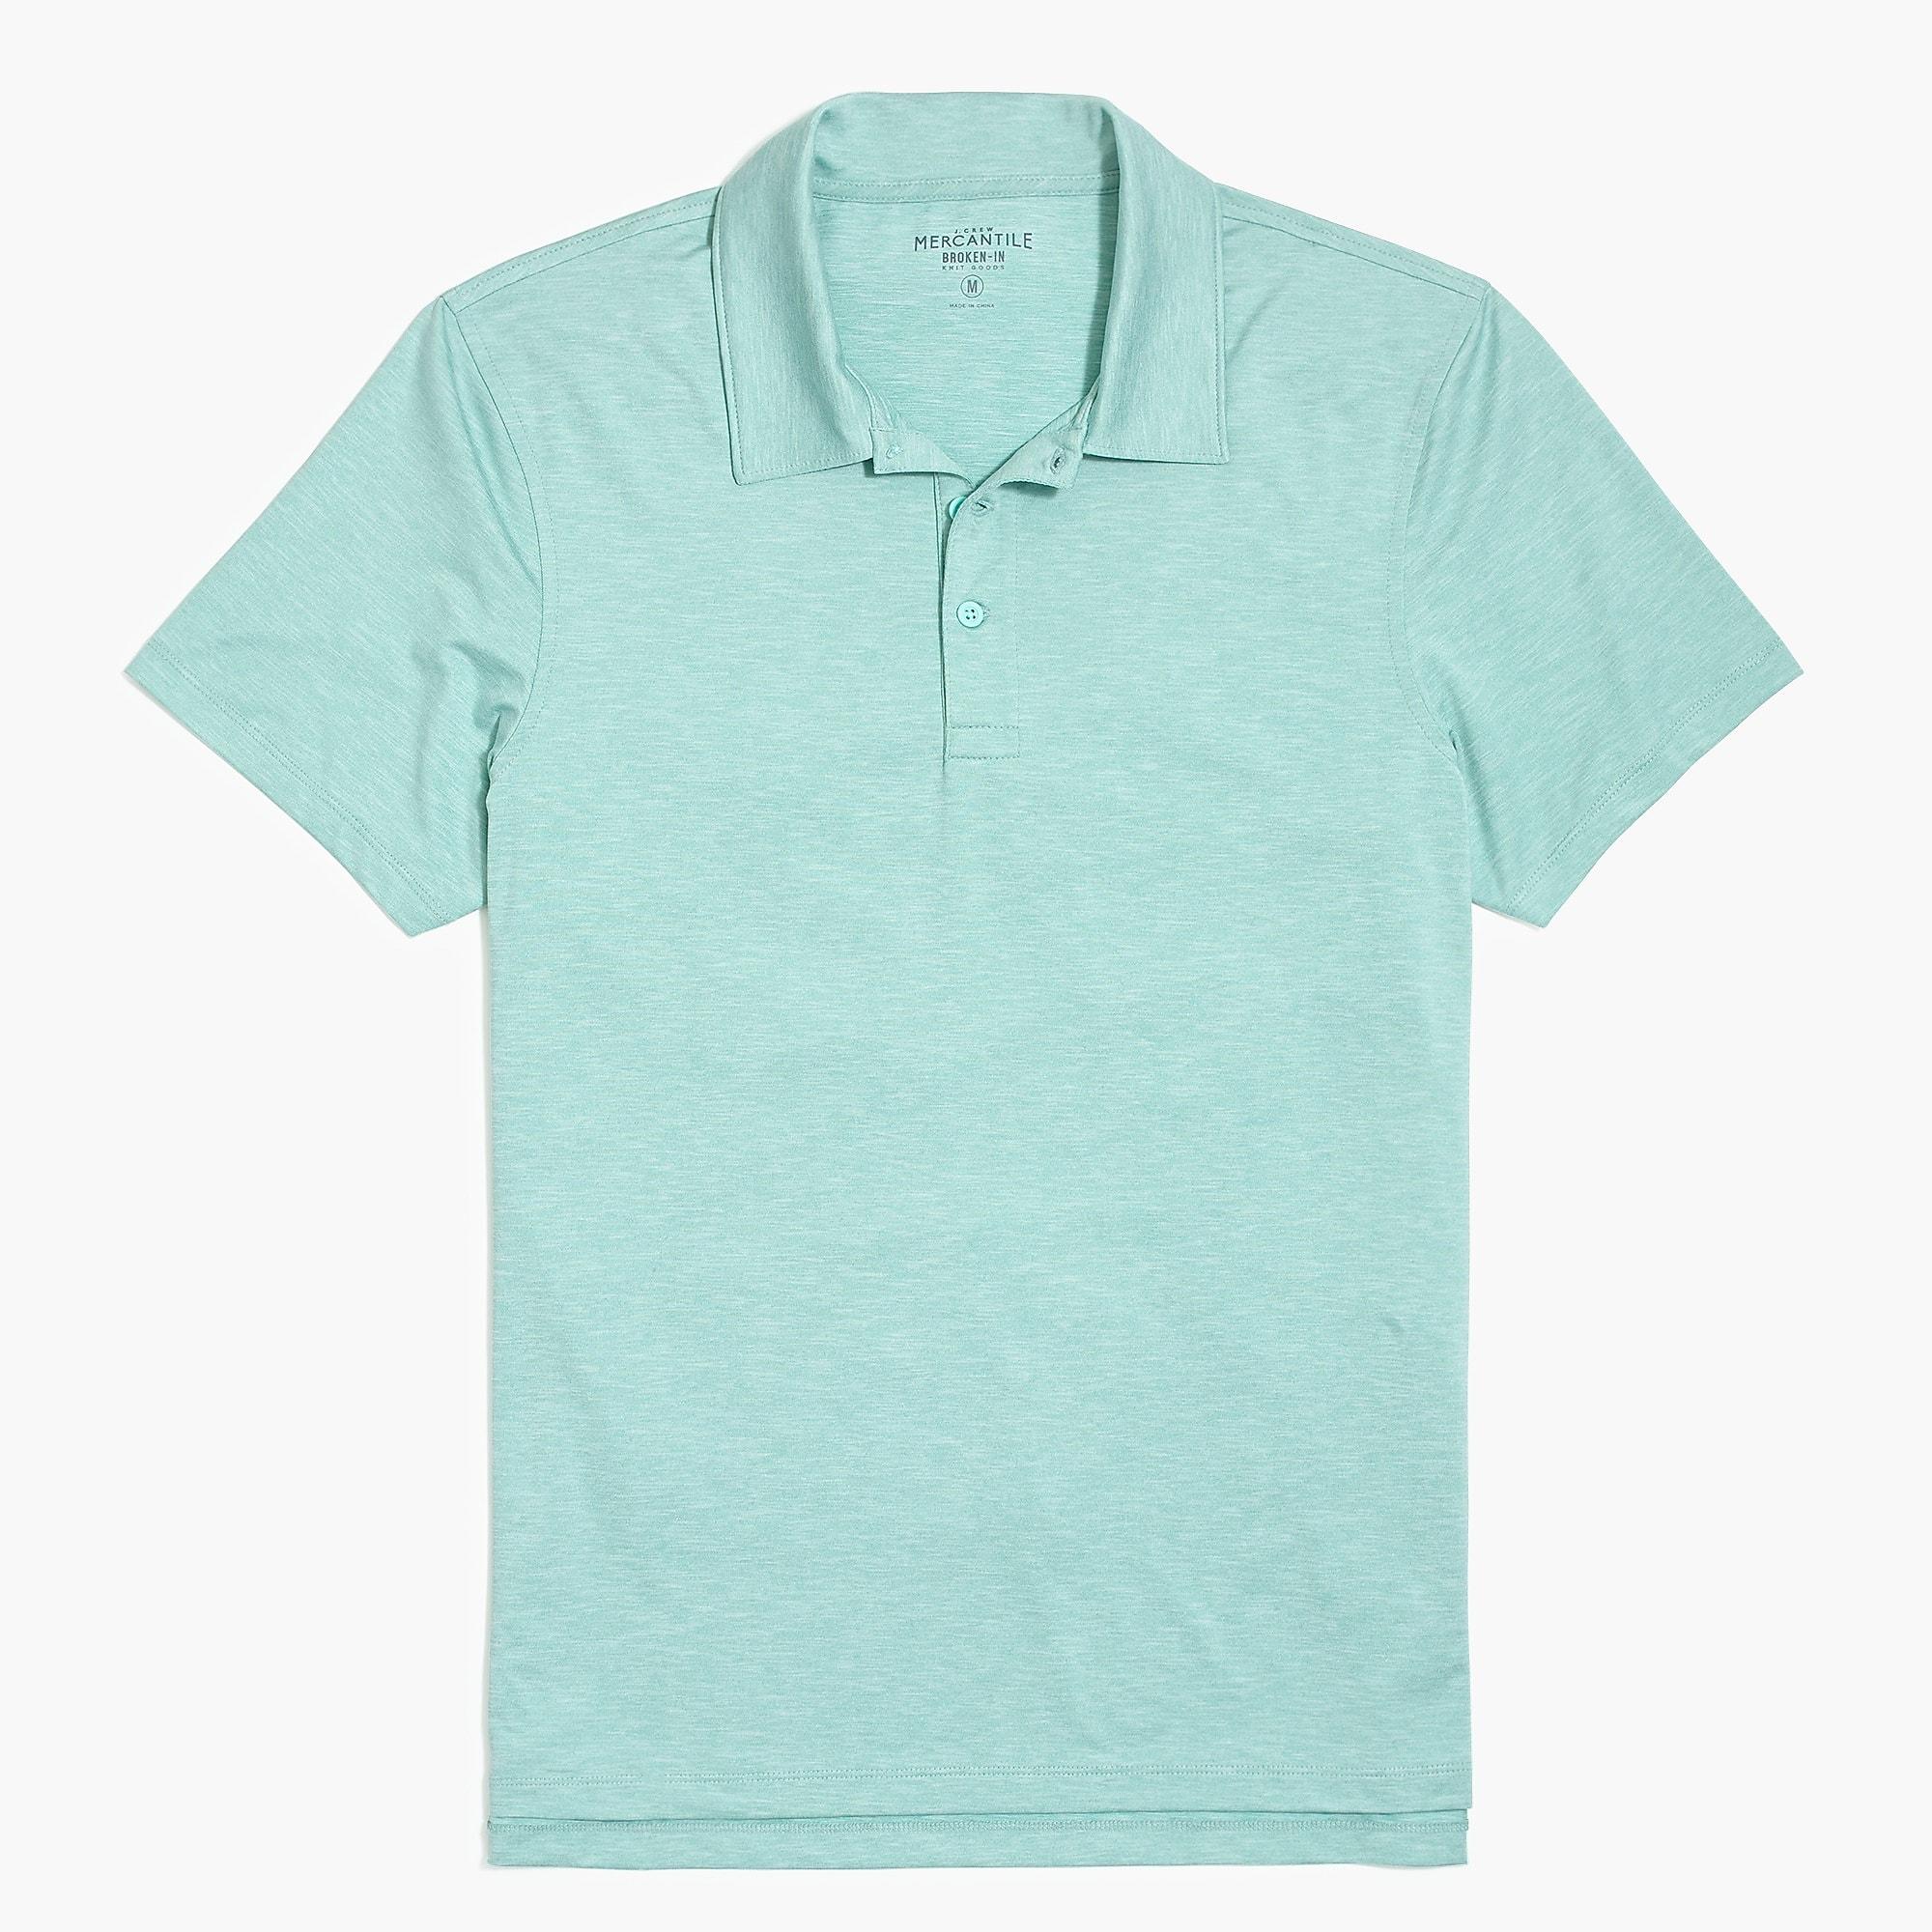 J.Crew Performance Polo Shirt in Blue for Men - Lyst